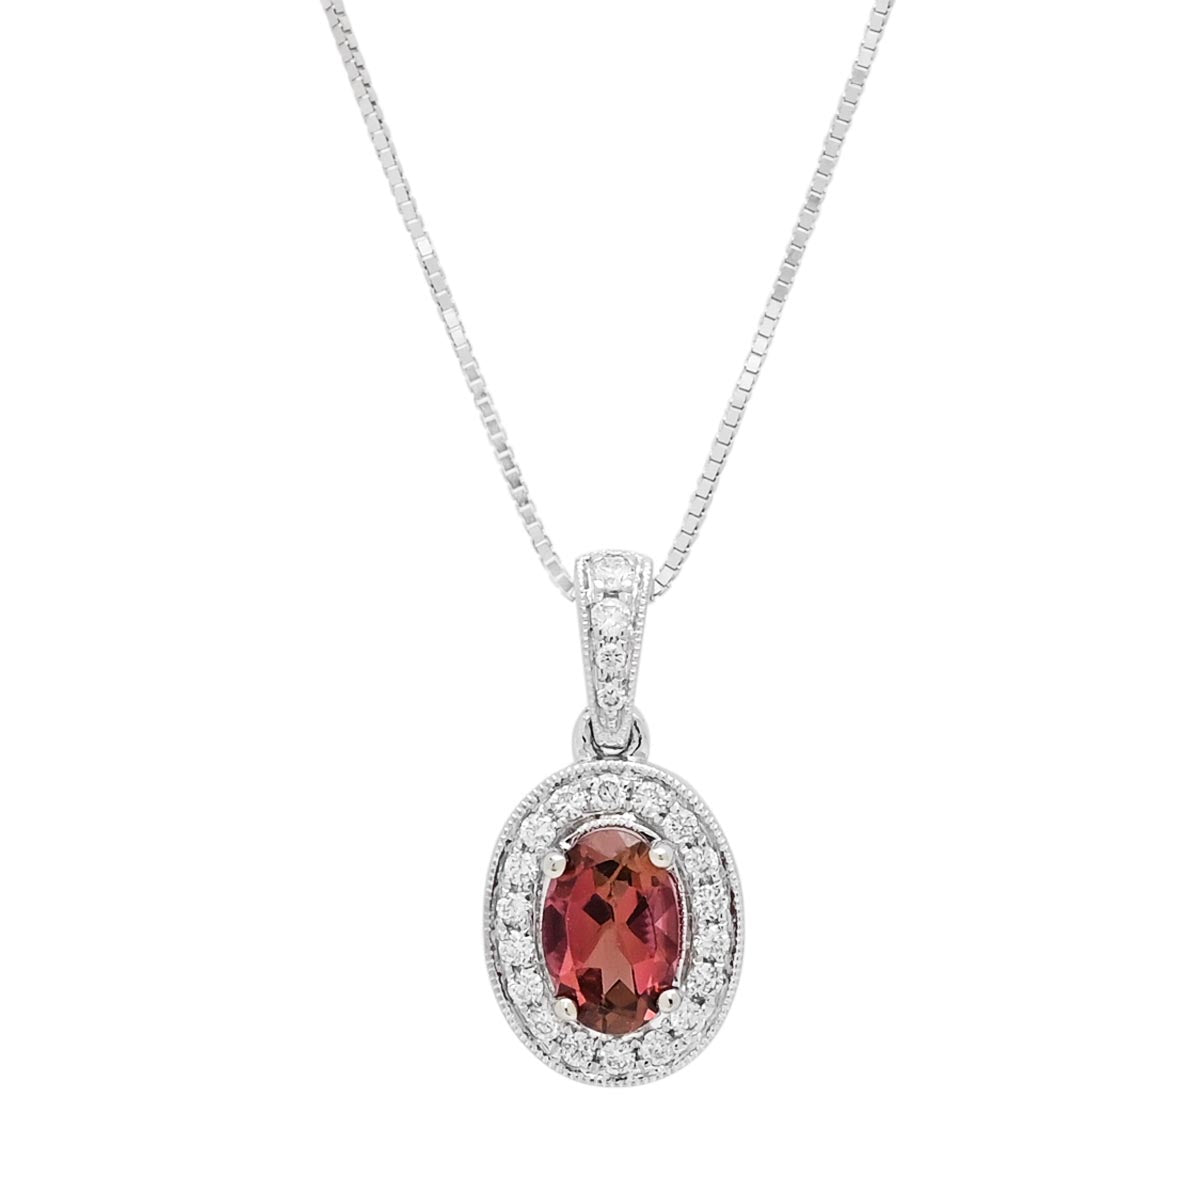 Maine Pink Tourmaline Necklace in 14kt White Gold (1/10ct tw)